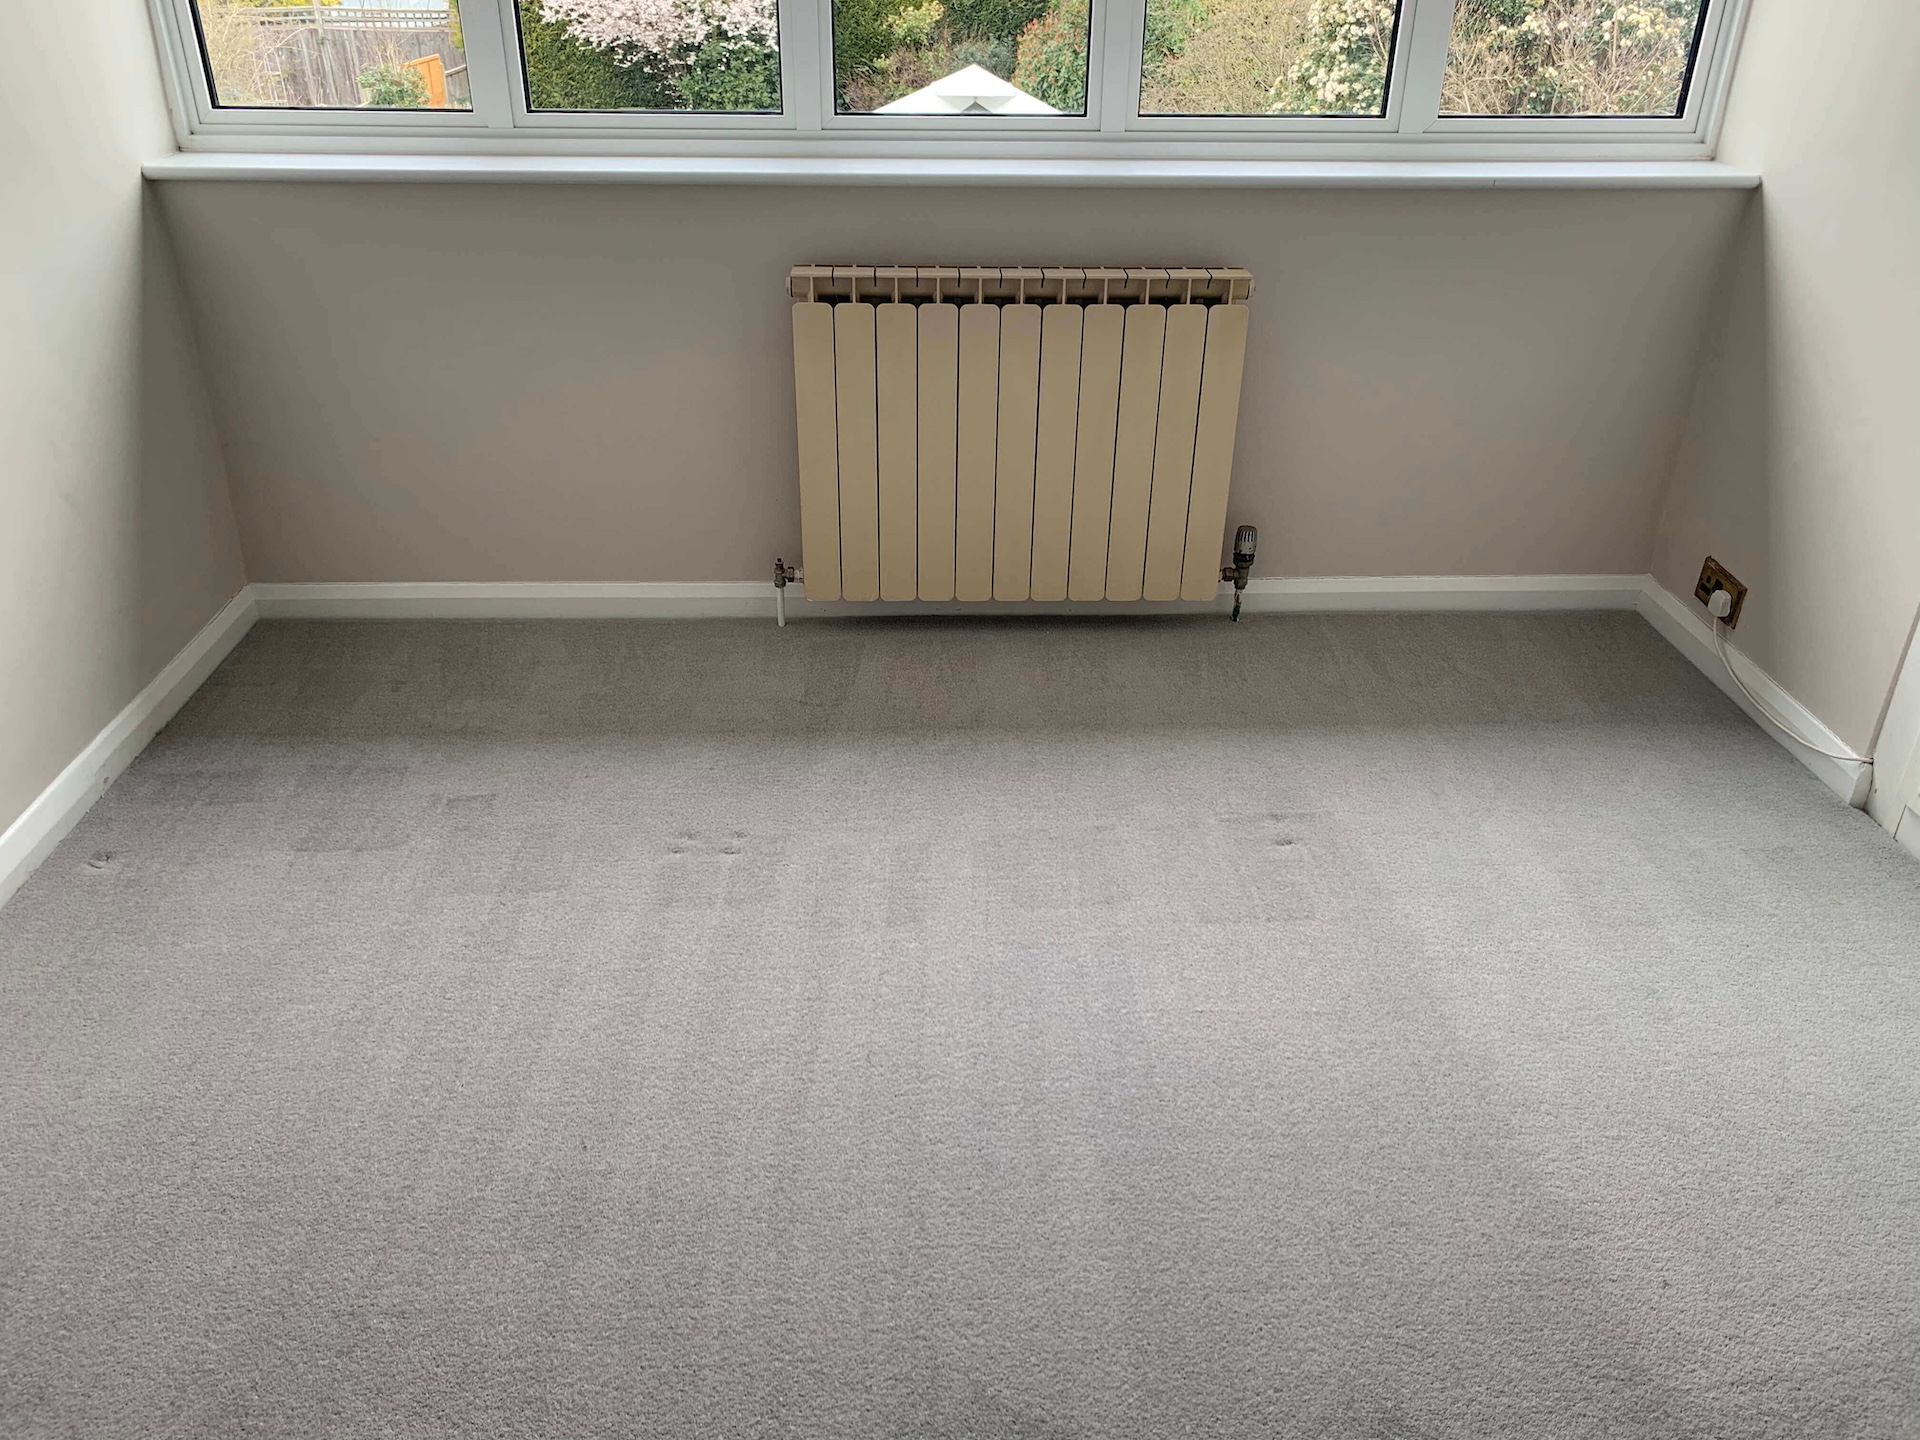 Immaculately cleaned bedroom with carpet in Wandsworth, SW18, after a thorough tenancy cleaning by Cleaningsure, featuring a dust-free environment, freshly vacuumed carpet, and a perfectly tidy appearance, ready for new tenants to move in.